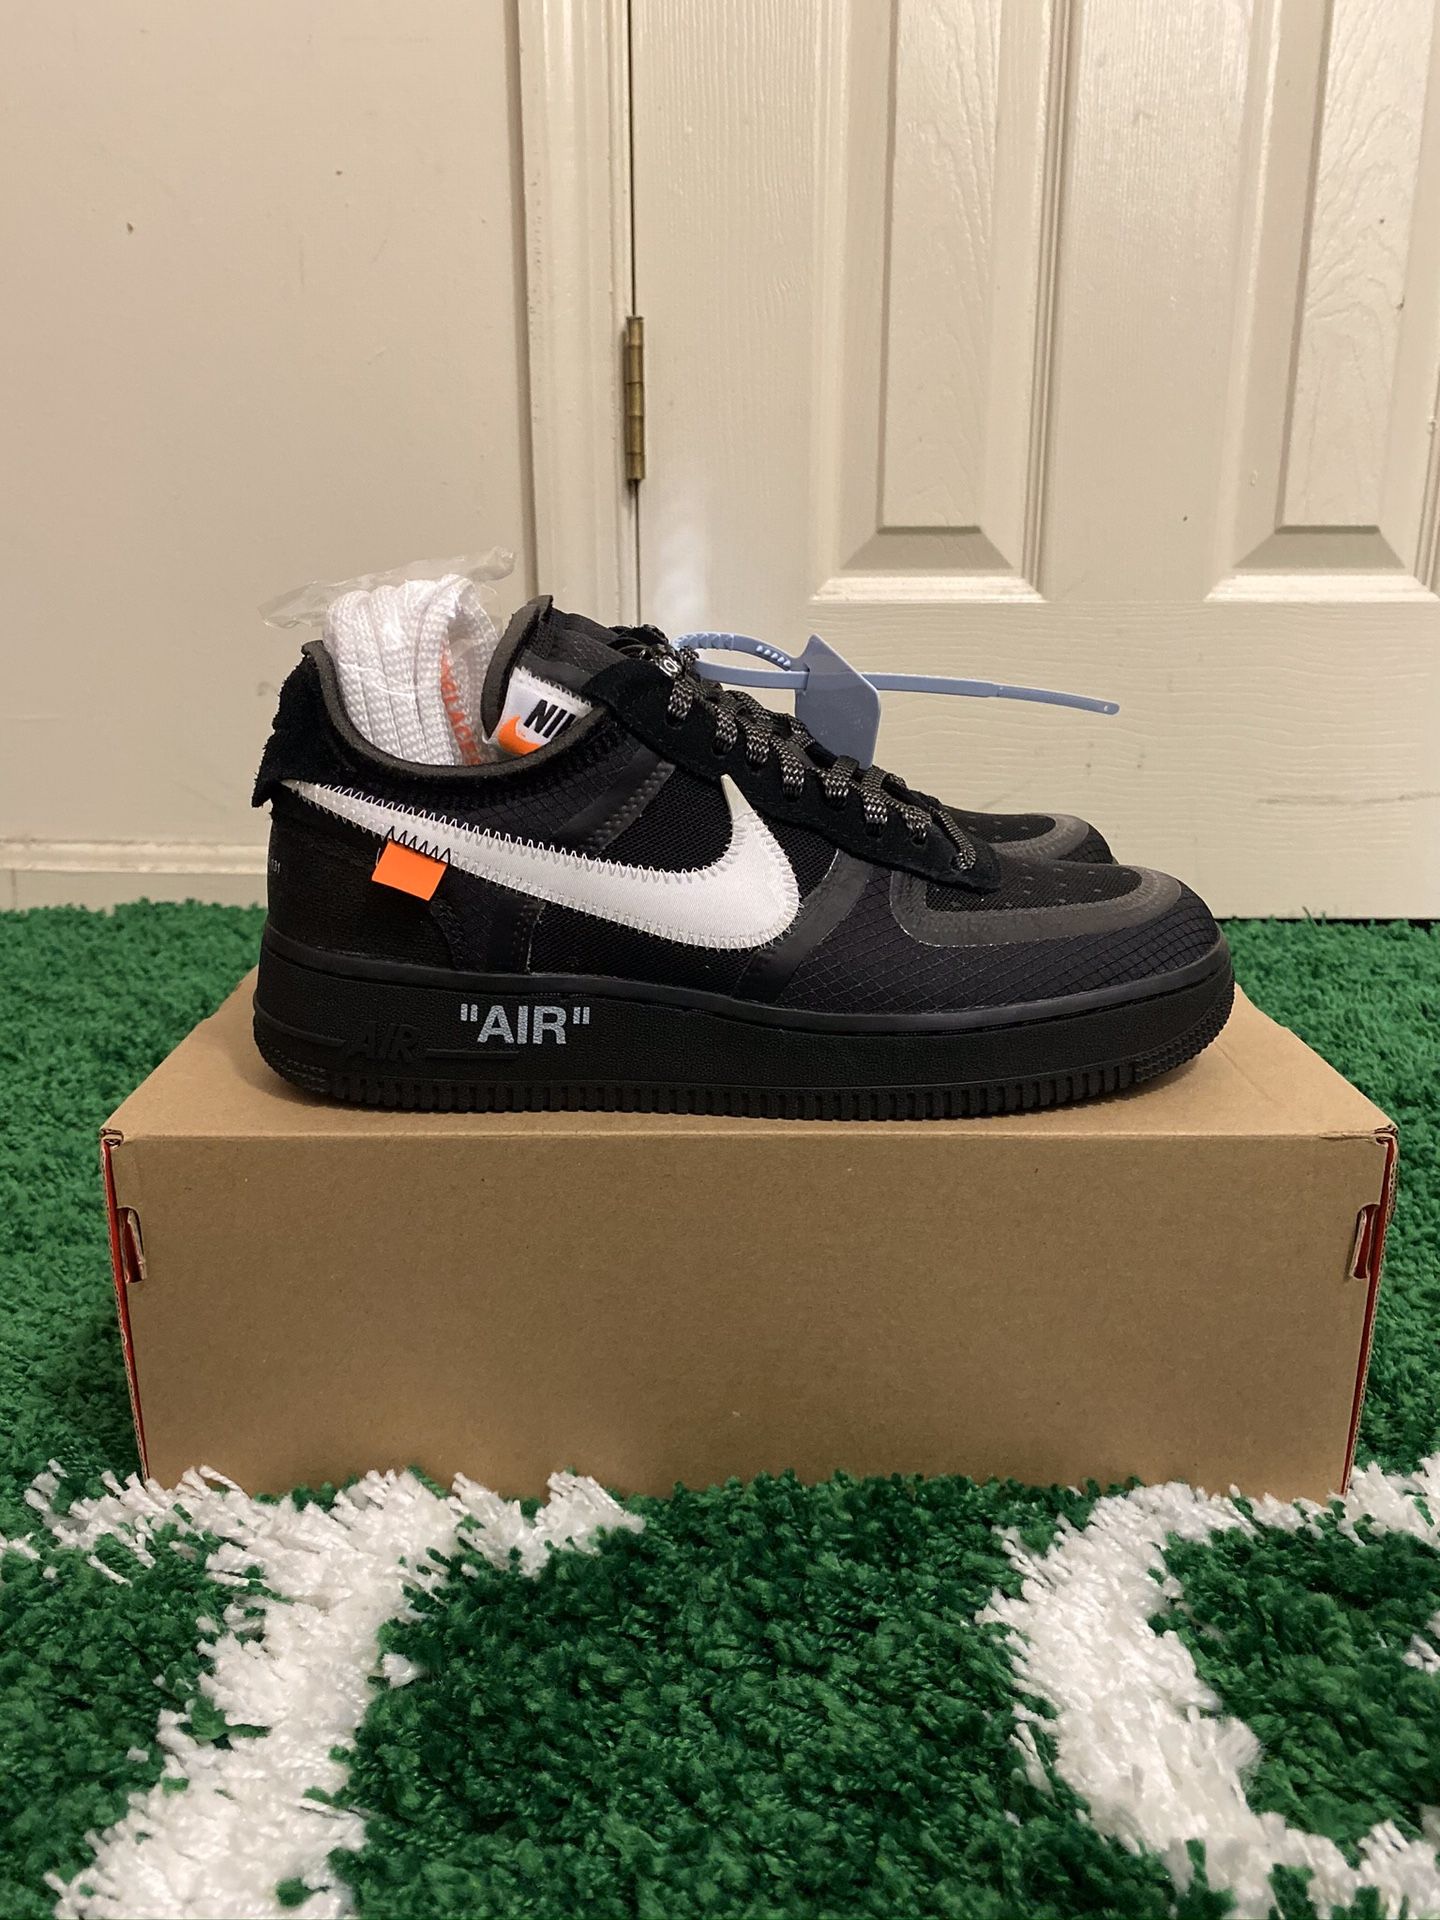 NEW NIKE AIR FORCE ONE LOW OFF WHITE BLACK LIMITED SIZES 8 8.5 9 9.5